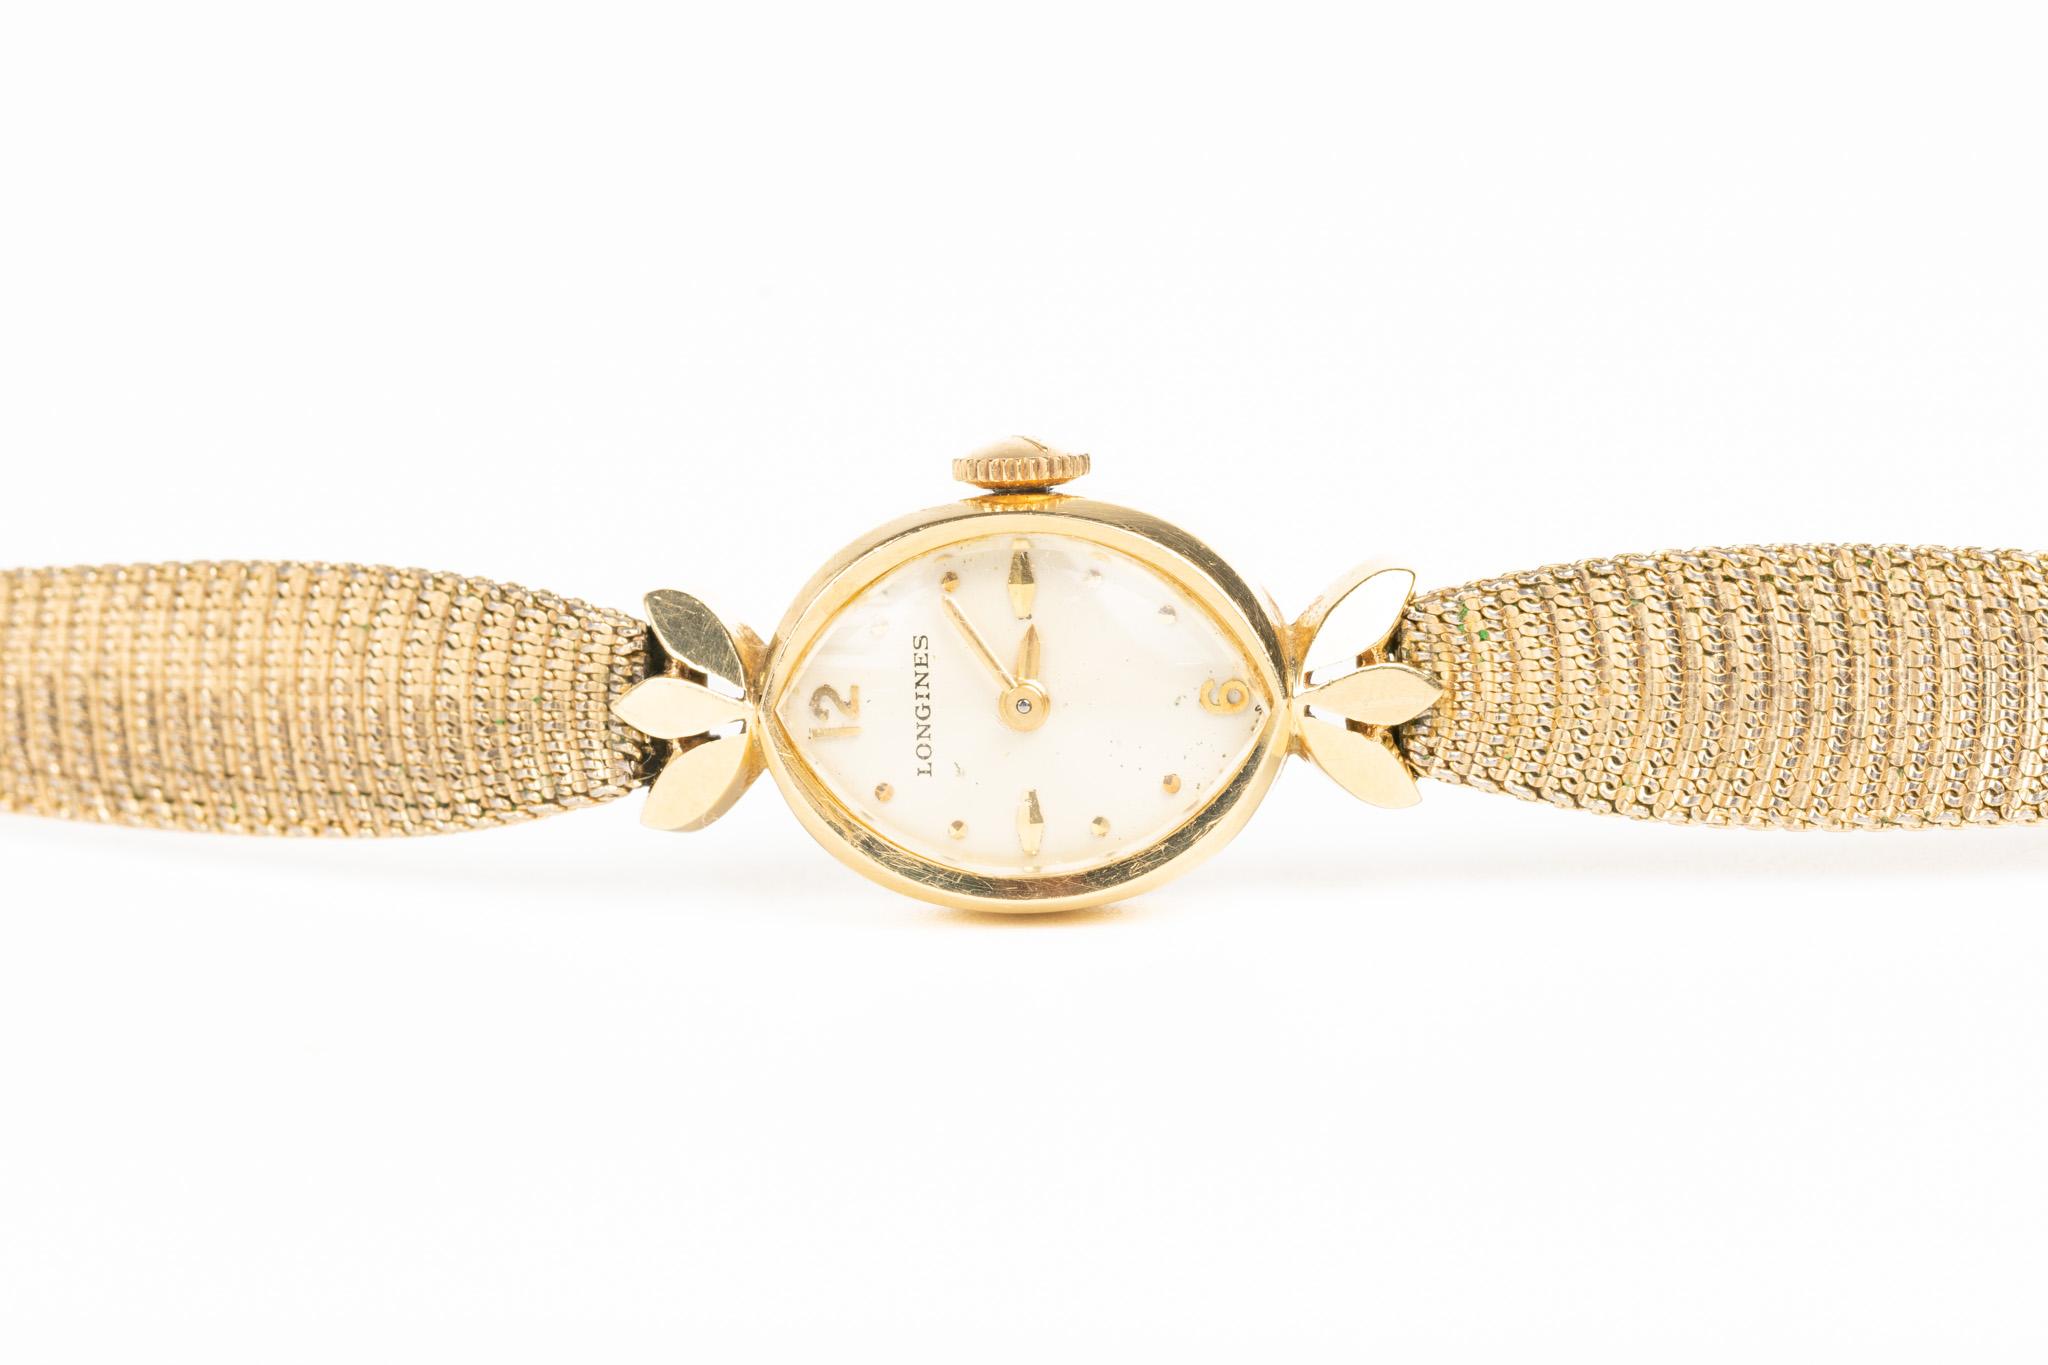 An elegant and timeless 14ct Gold Longines Lady's Bracelet Watch with an original and beautiful gold-plated bracelet and accompanying gold watch face. With its elegant look, this Longines watch combines vintage art deco style aesthetic and